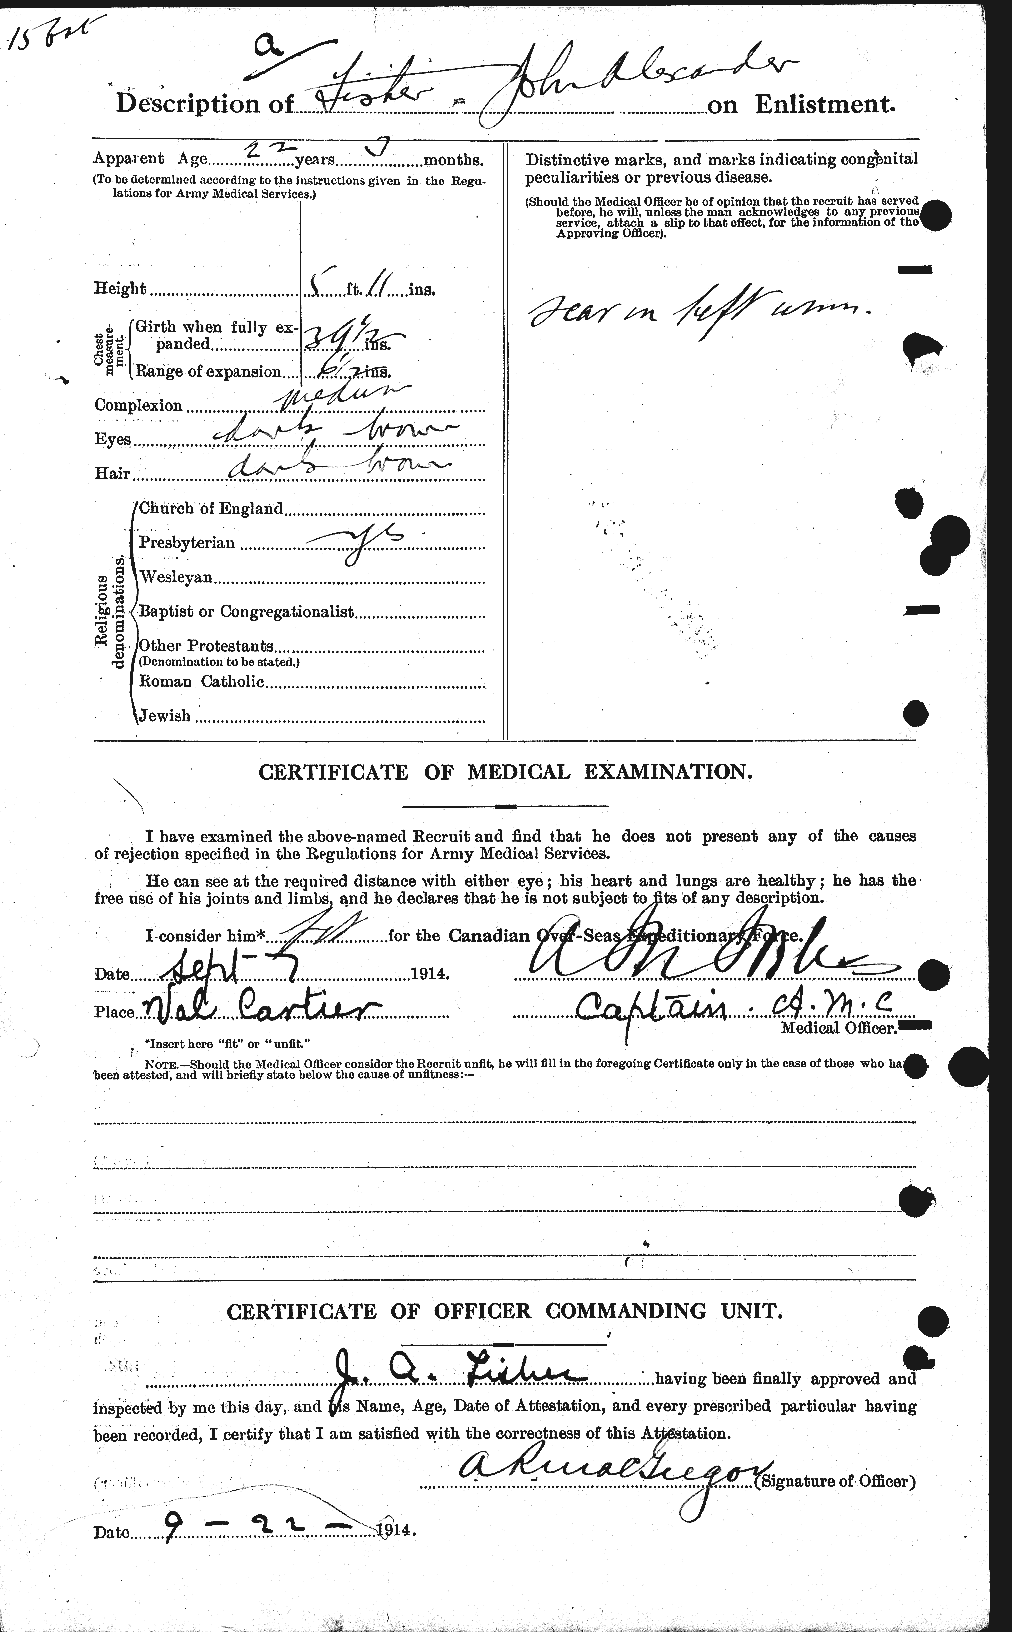 Personnel Records of the First World War - CEF 326921b